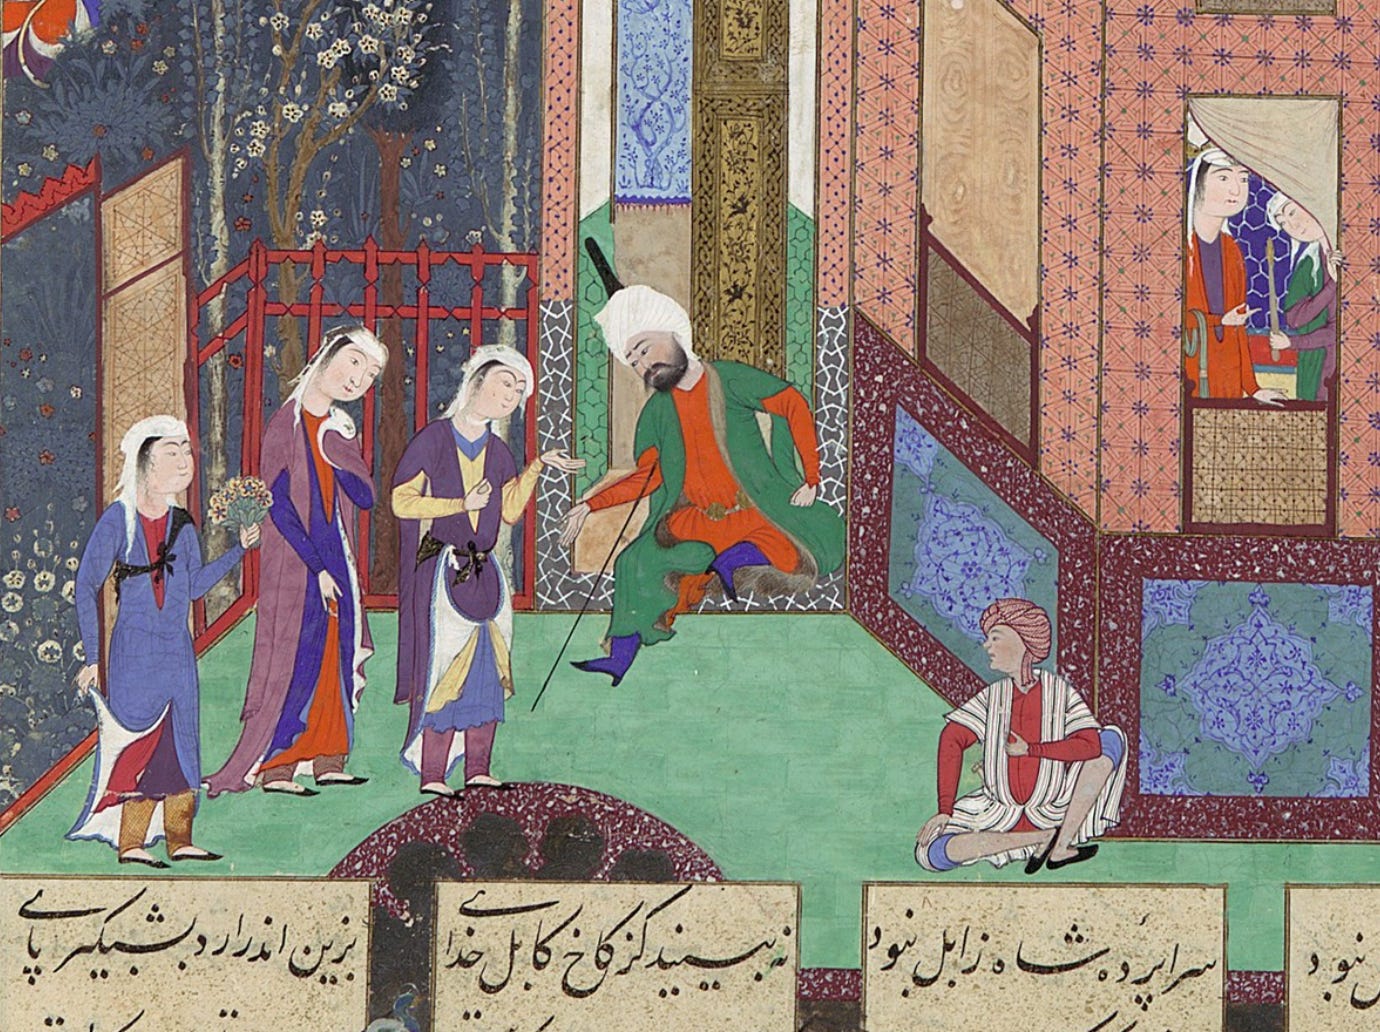 Three women come to greet a man, someone sits on the outside, and inside there are other women. Courtyard of a palace scene.